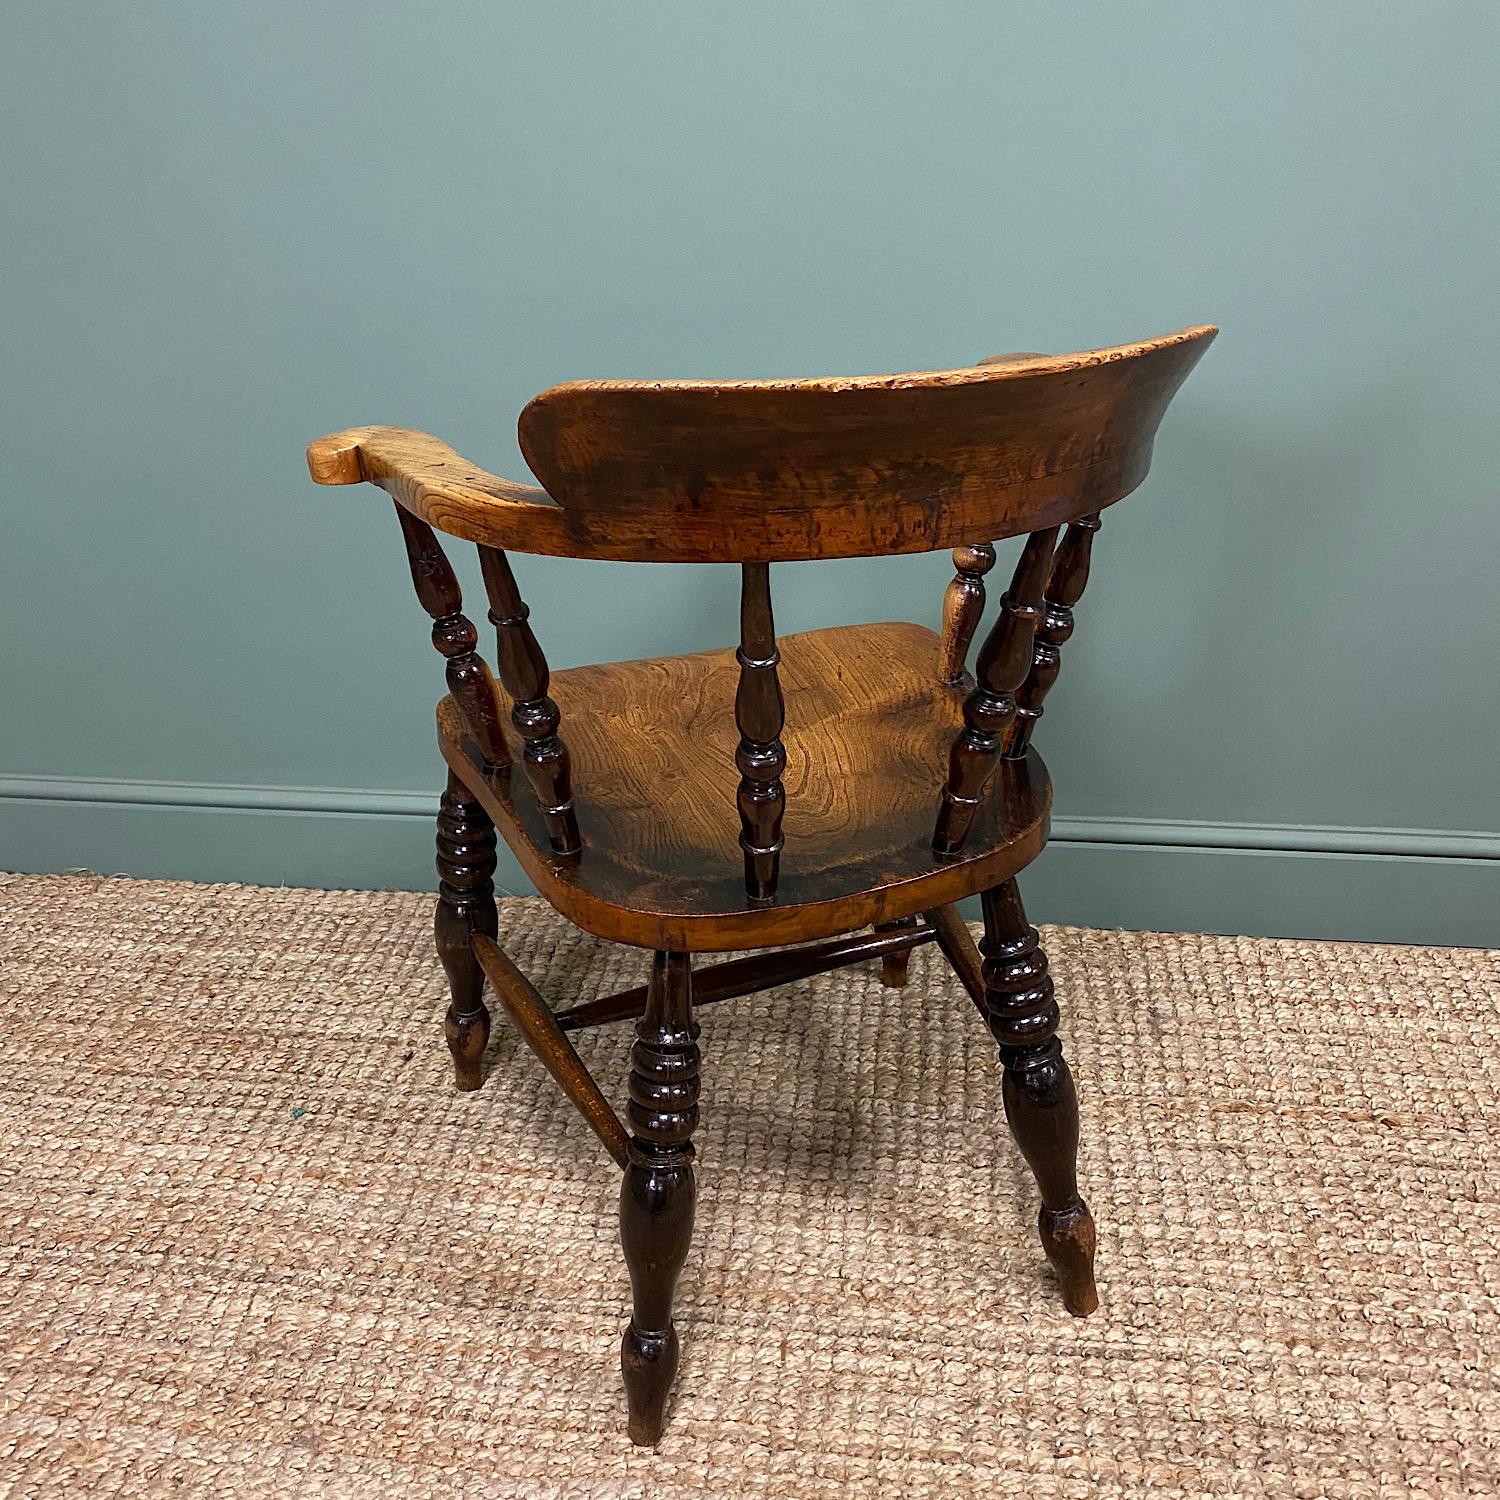 Antique smokers bow chair

This beautiful late 19th century Victorian Country house smokers bow antique carver arm chair / captains chair dates from ca. 1860 and is in constructed in a beautifully figured elm and Ash. It has a curved back with